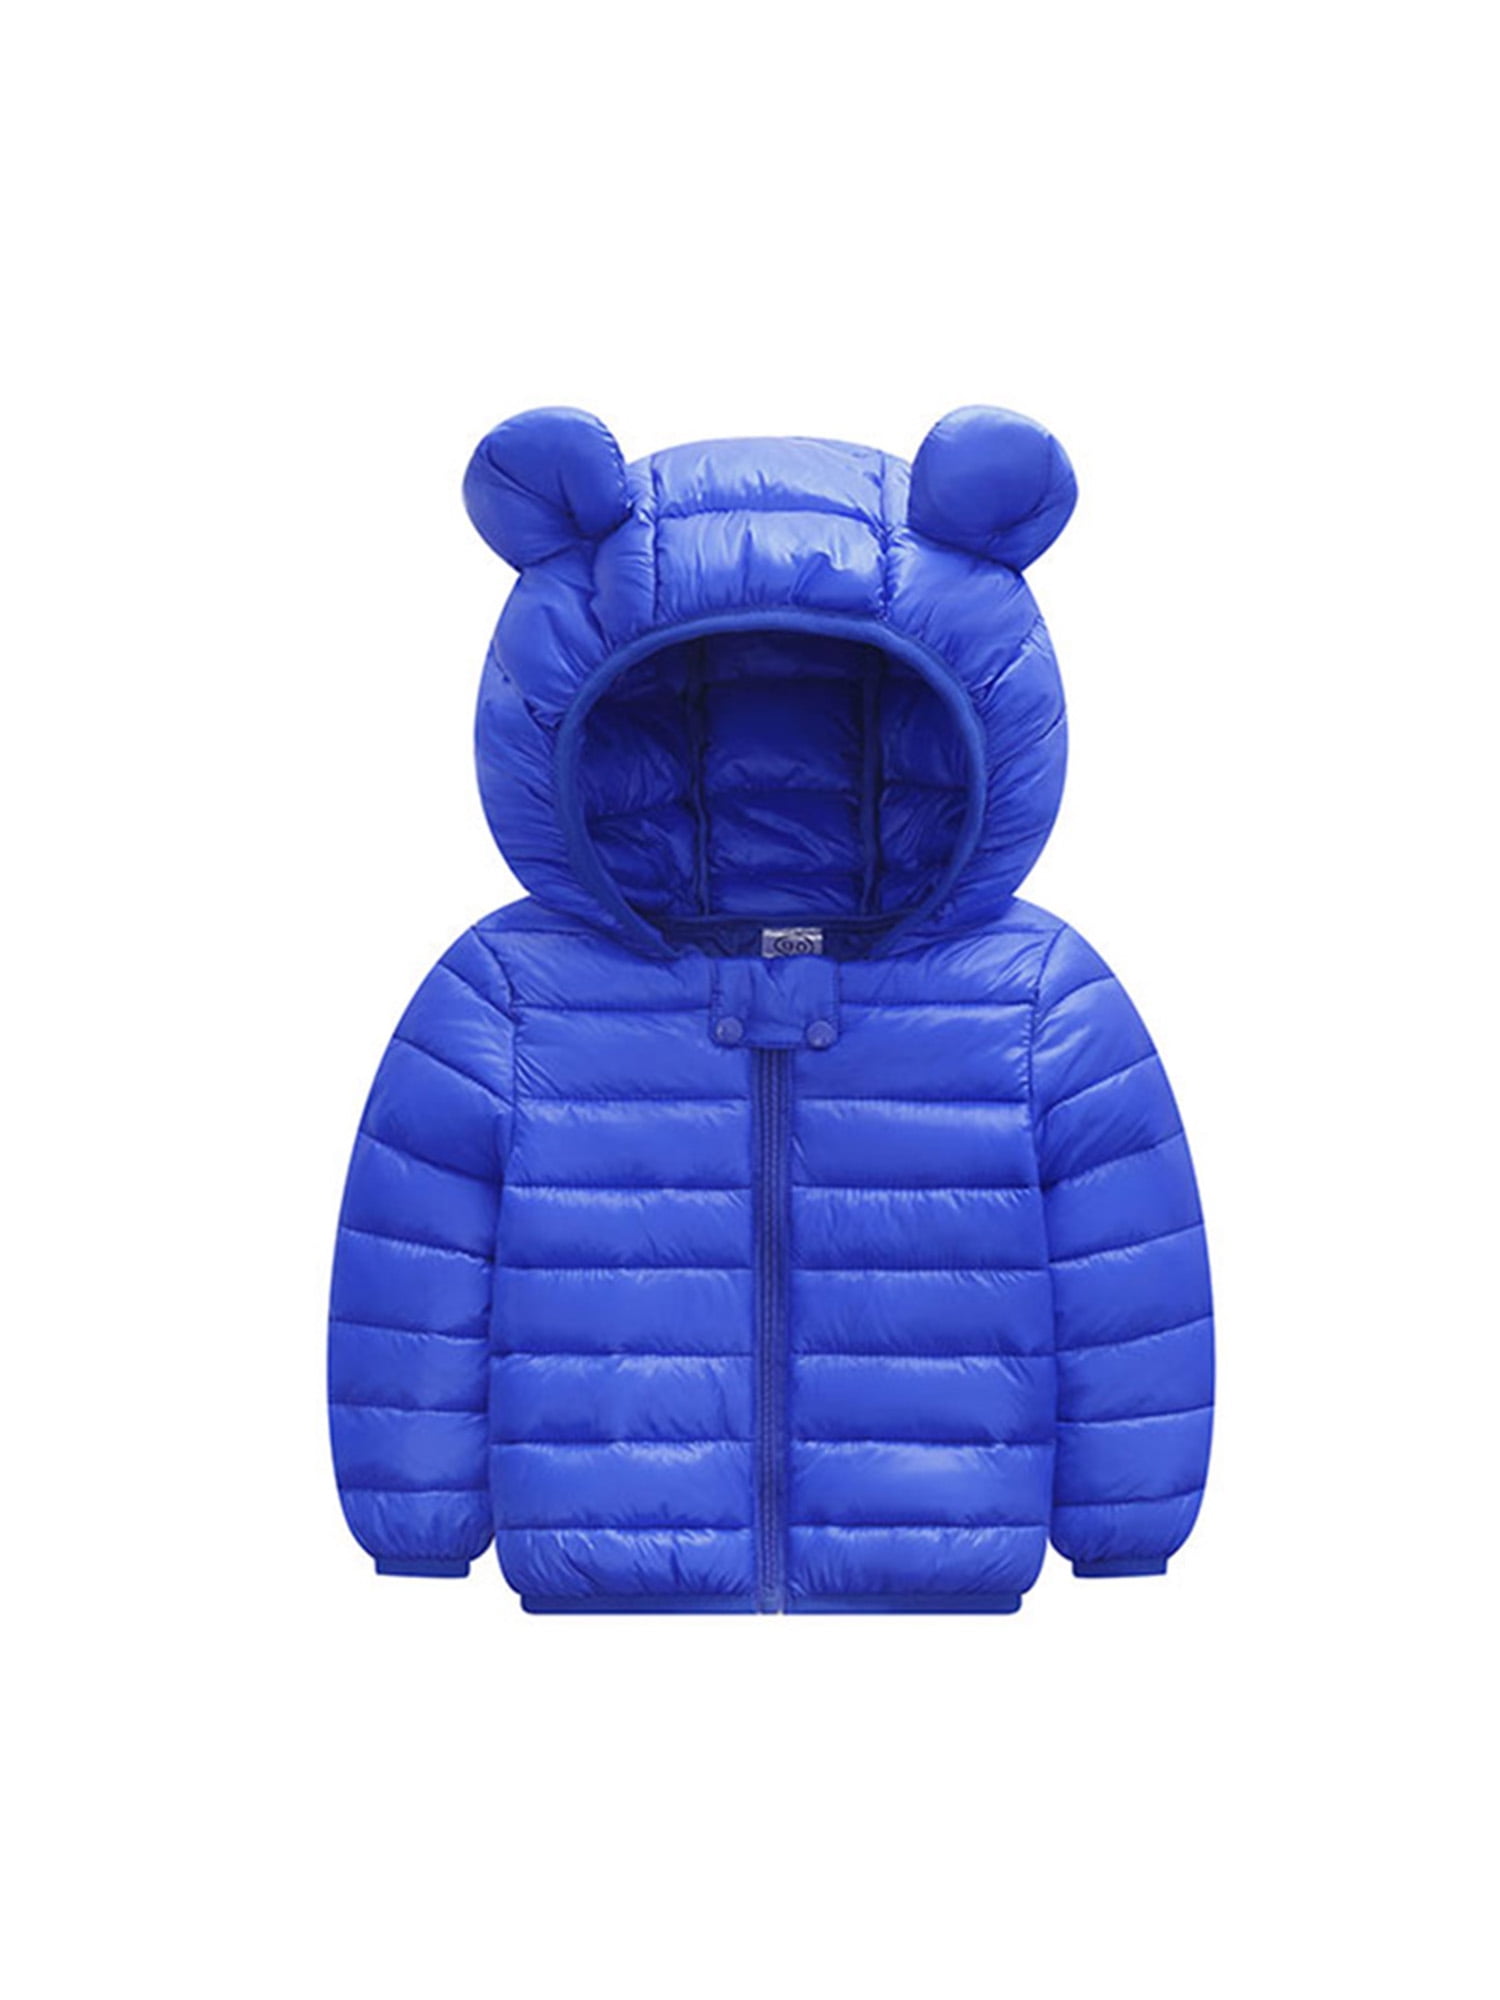 PatPat Baby / Toddler Stylish 3D Ear Print Solid Hooded Coat